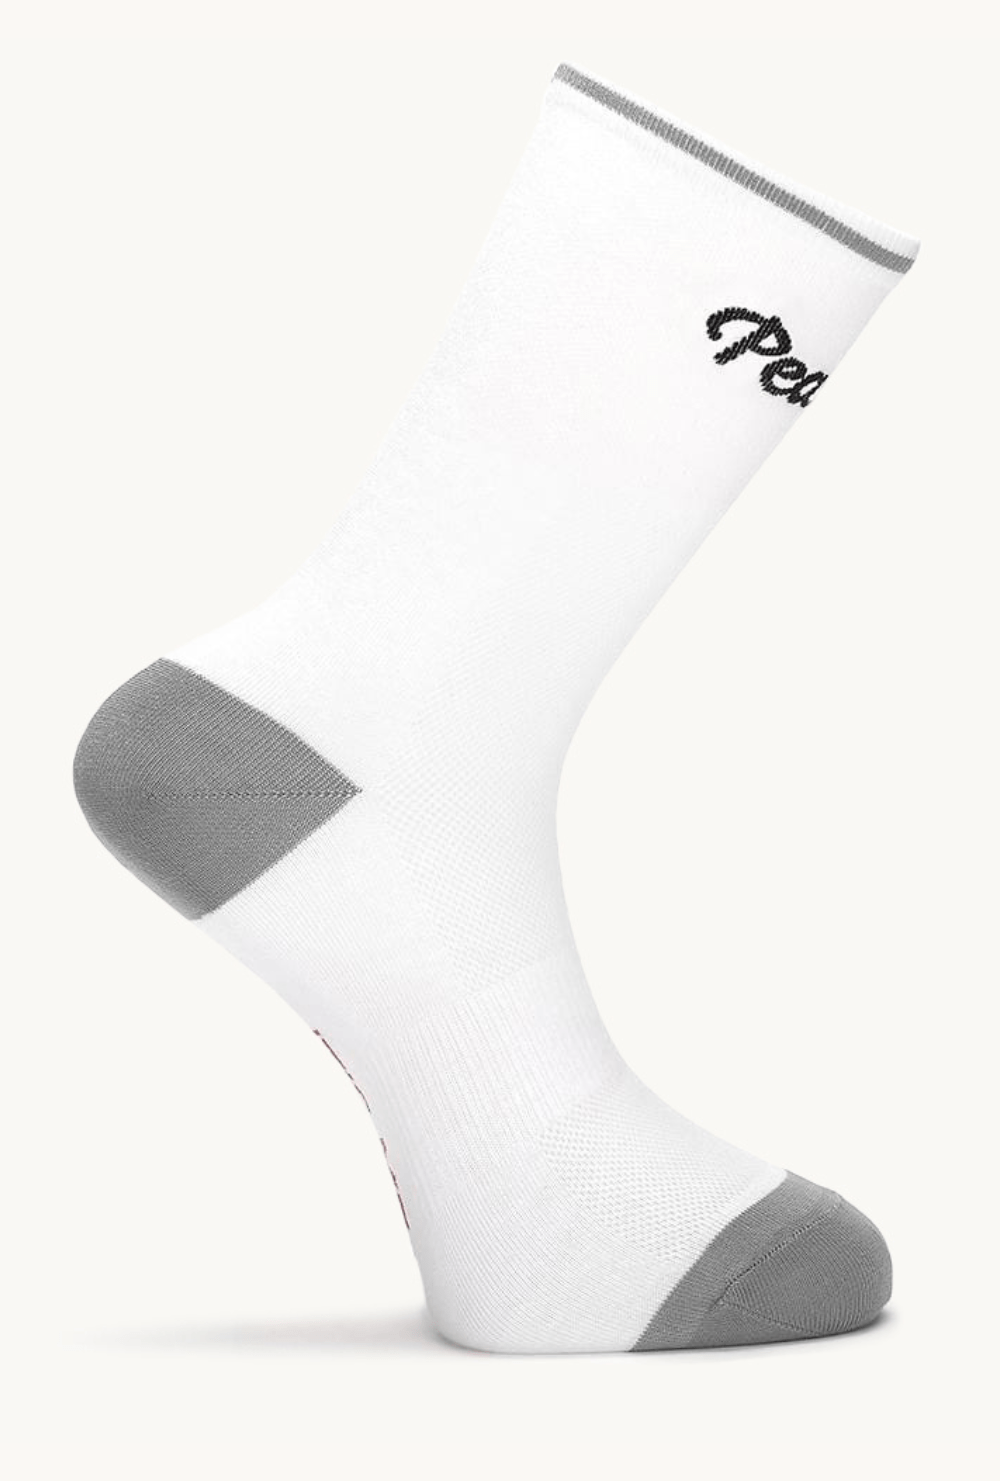 Pearson 1860  Its Not You Its Me - Socks  Small / Medium